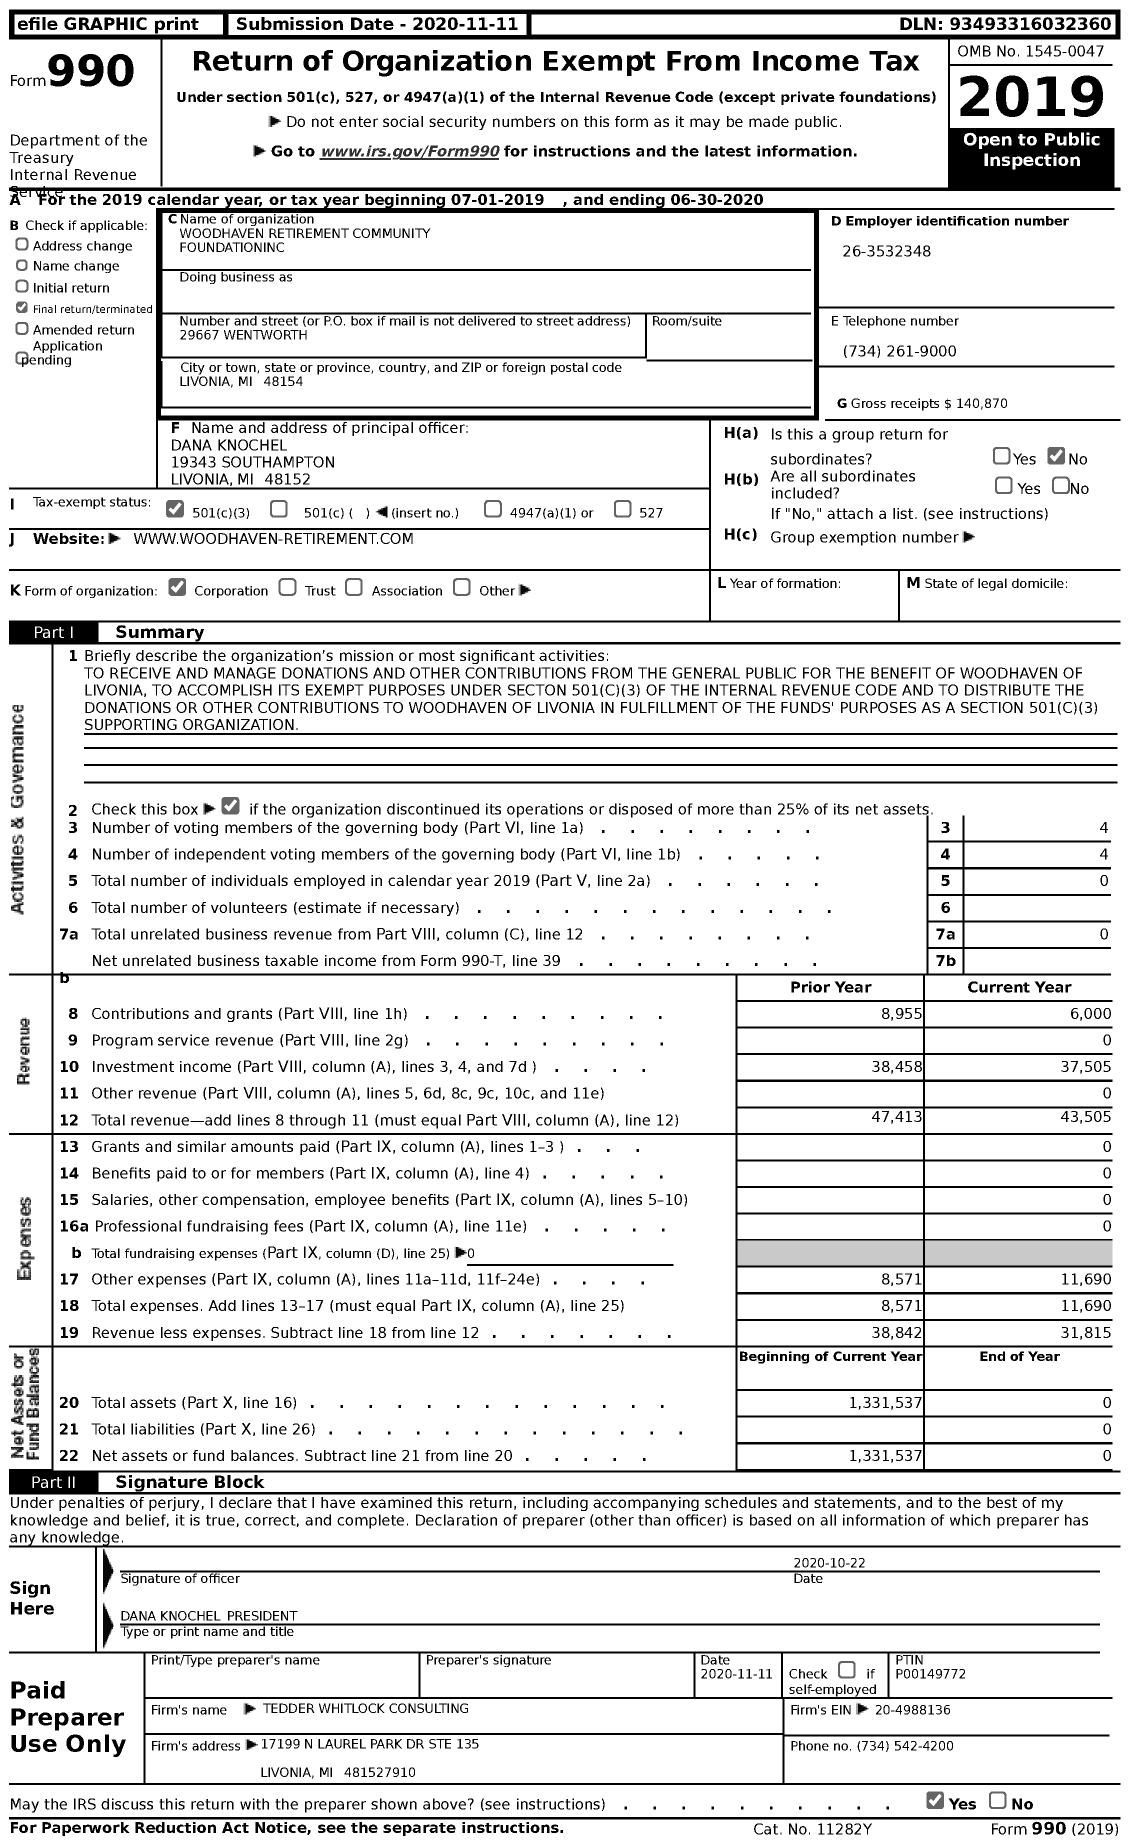 Image of first page of 2019 Form 990 for Woodhaven Retirement Community Foundation